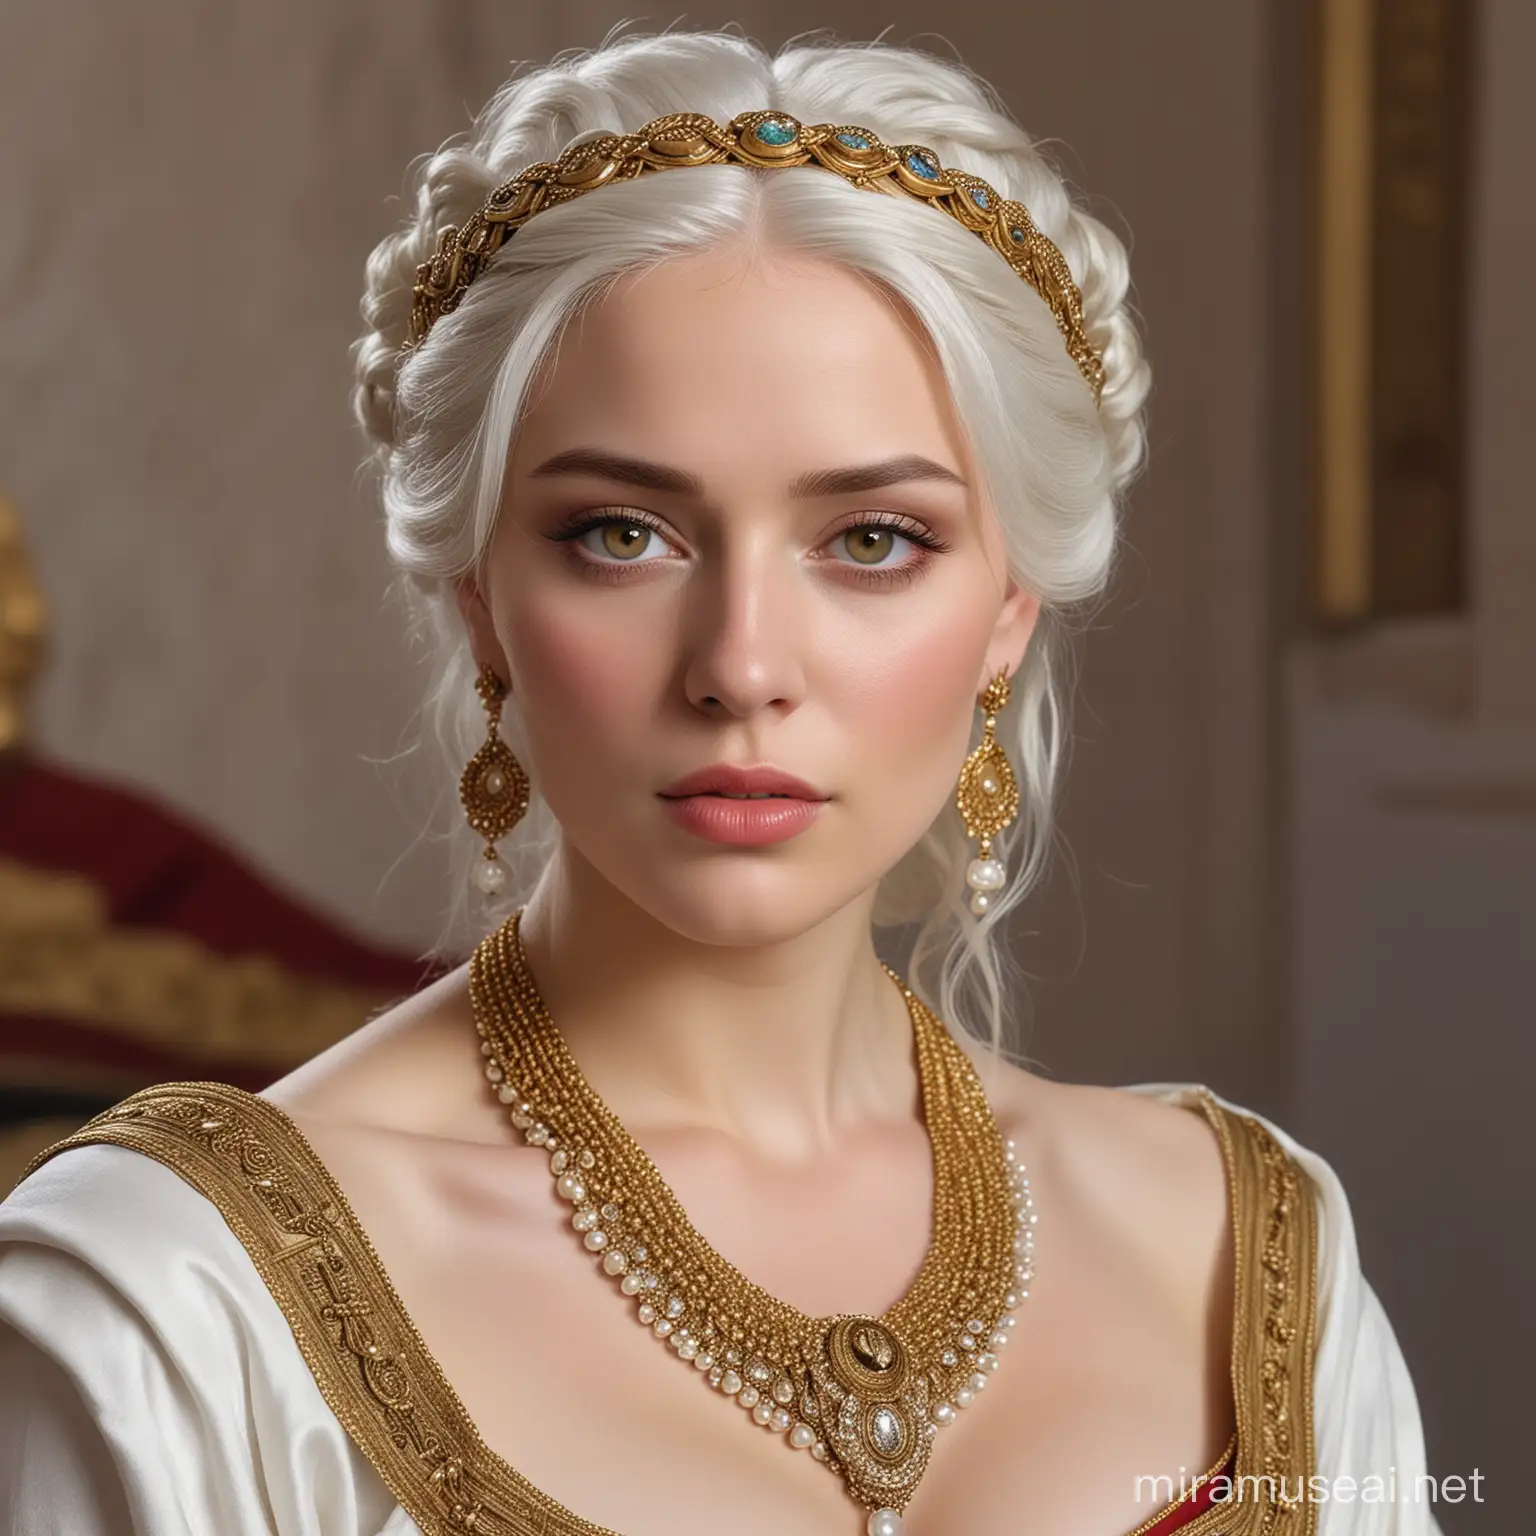 Empress from ancient Rome, with pure white hair, with braided hair, with very pale skin, with a lot of golden jewelry, with a button nose, with full lips, with dark brown eyes, makeup free, with a feminine gown, with big breasts